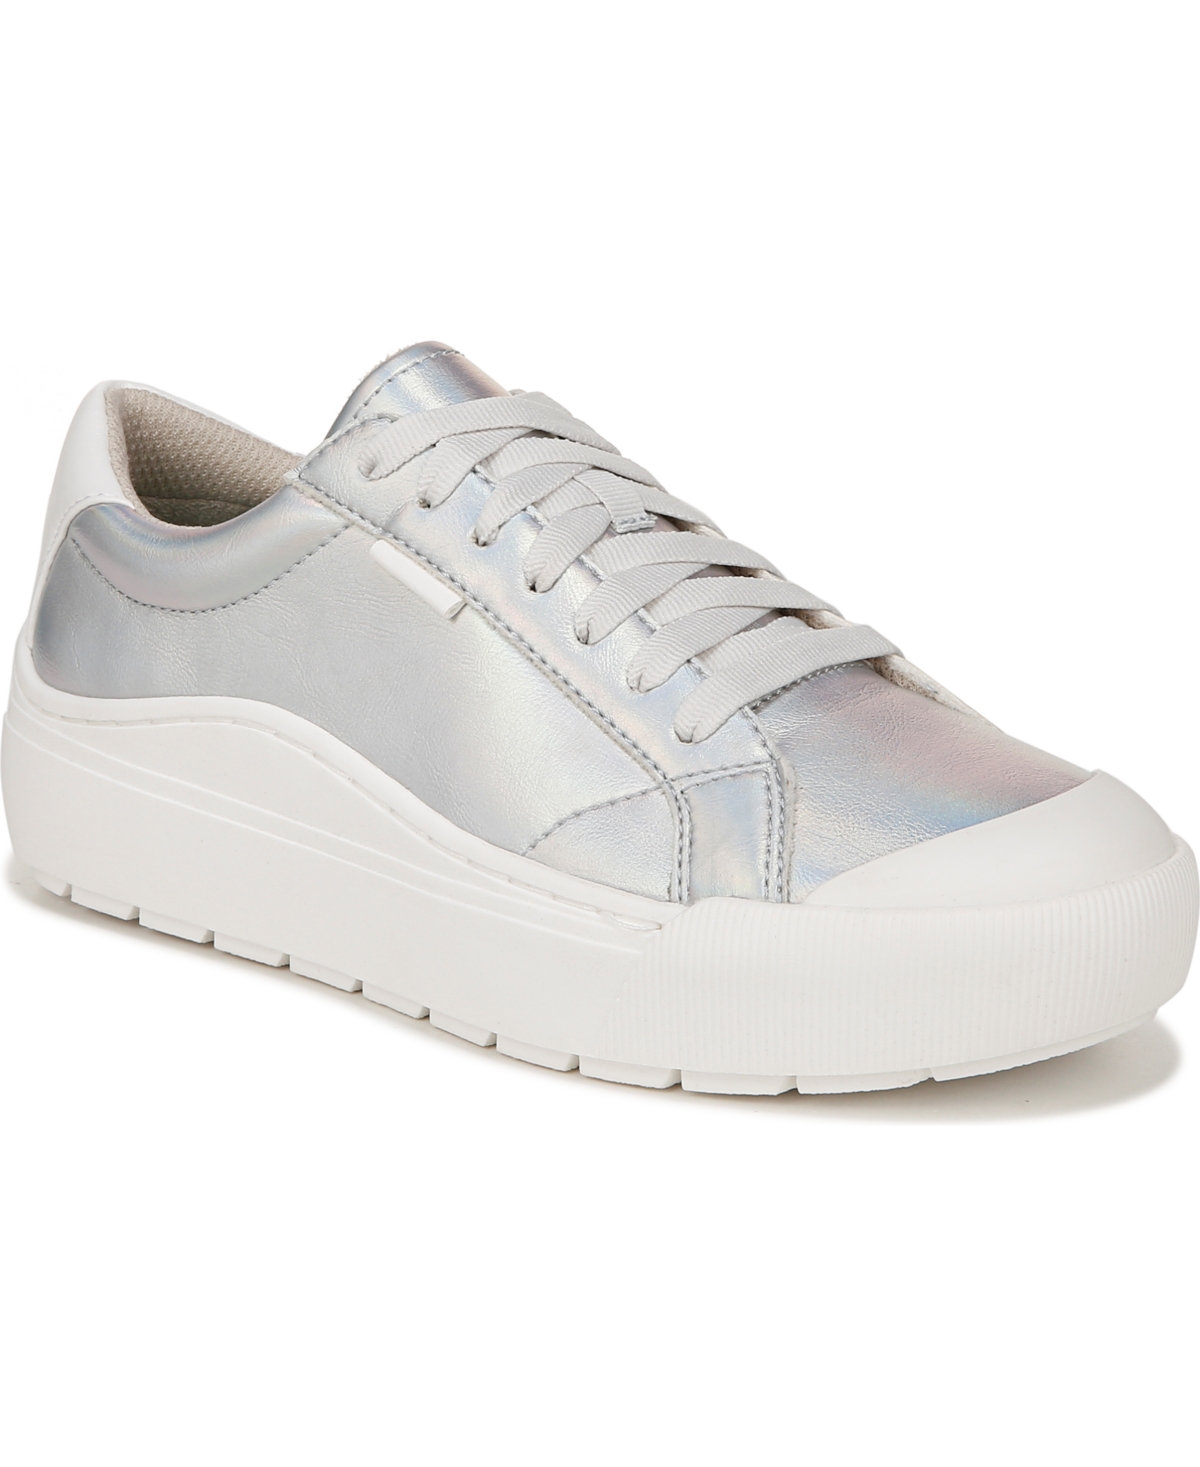 Dr. Scholl's Women's Time Off Platform Sneakers In Metallic Silver Faux Leather